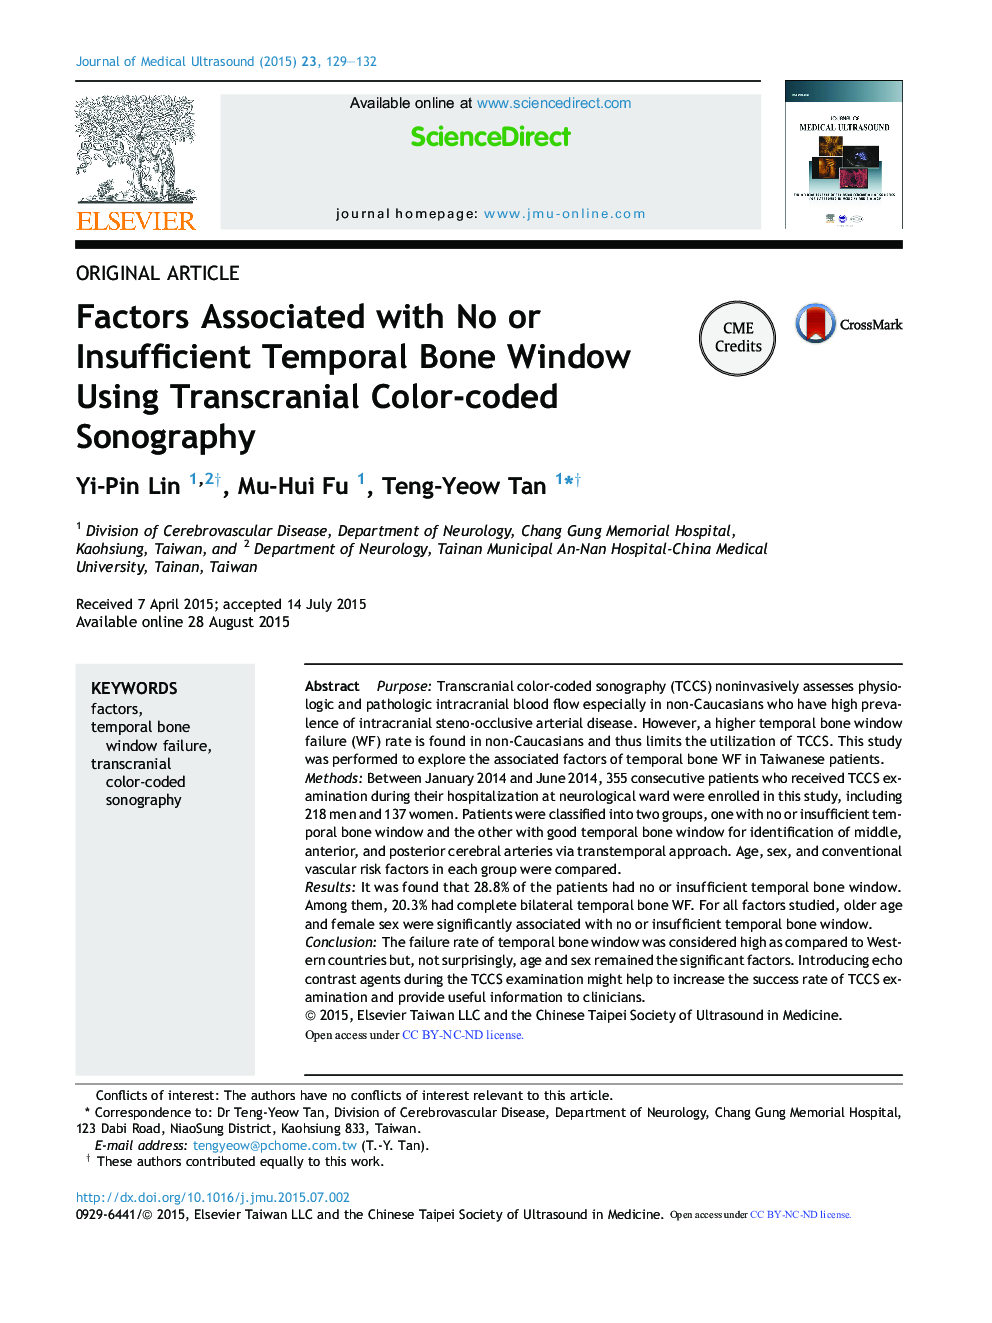 Factors Associated with No or Insufficient Temporal Bone Window Using Transcranial Color-coded Sonography 